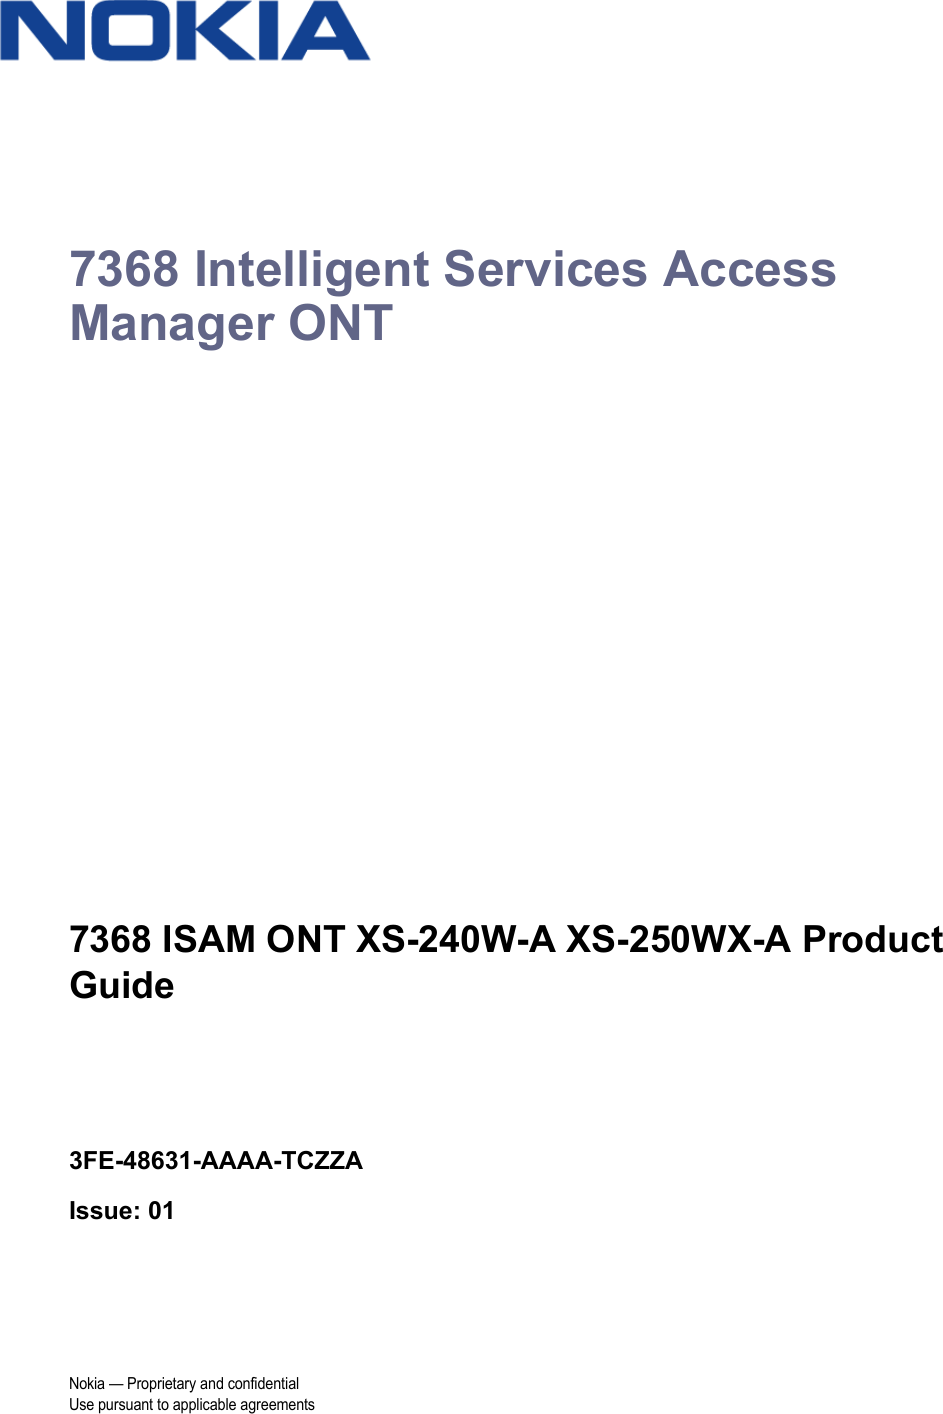 Nokia — Proprietary and confidentialUse pursuant to applicable agreements 7368 Intelligent Services Access Manager ONT7368 ISAM ONT XS-240W-A XS-250WX-A Product Guide3FE-48631-AAAA-TCZZAIssue: 01 7368 ISAM ONT XS-240W-A XS-250WX-A Product Guide